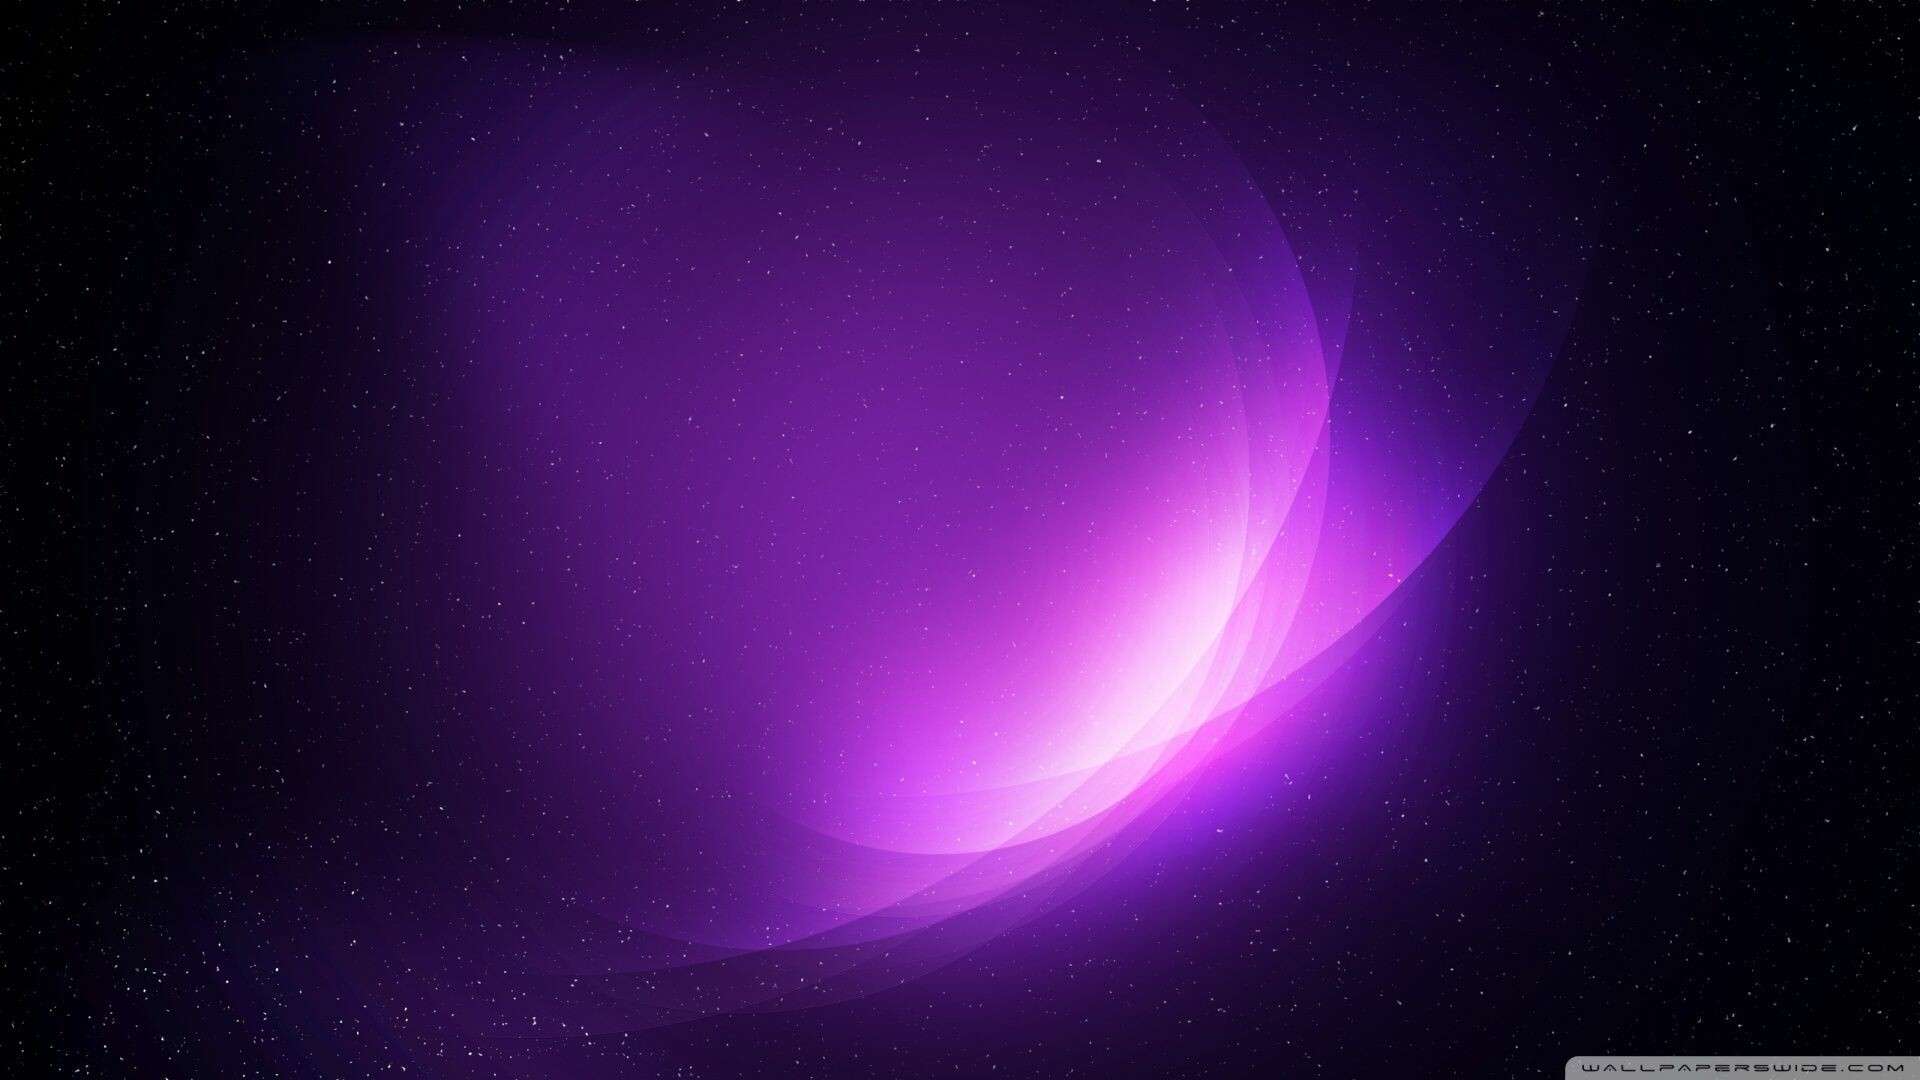 Abstract Space Wallpaper: HD, 4K, 5K for PC and Mobile. Download free image for iPhone, Android